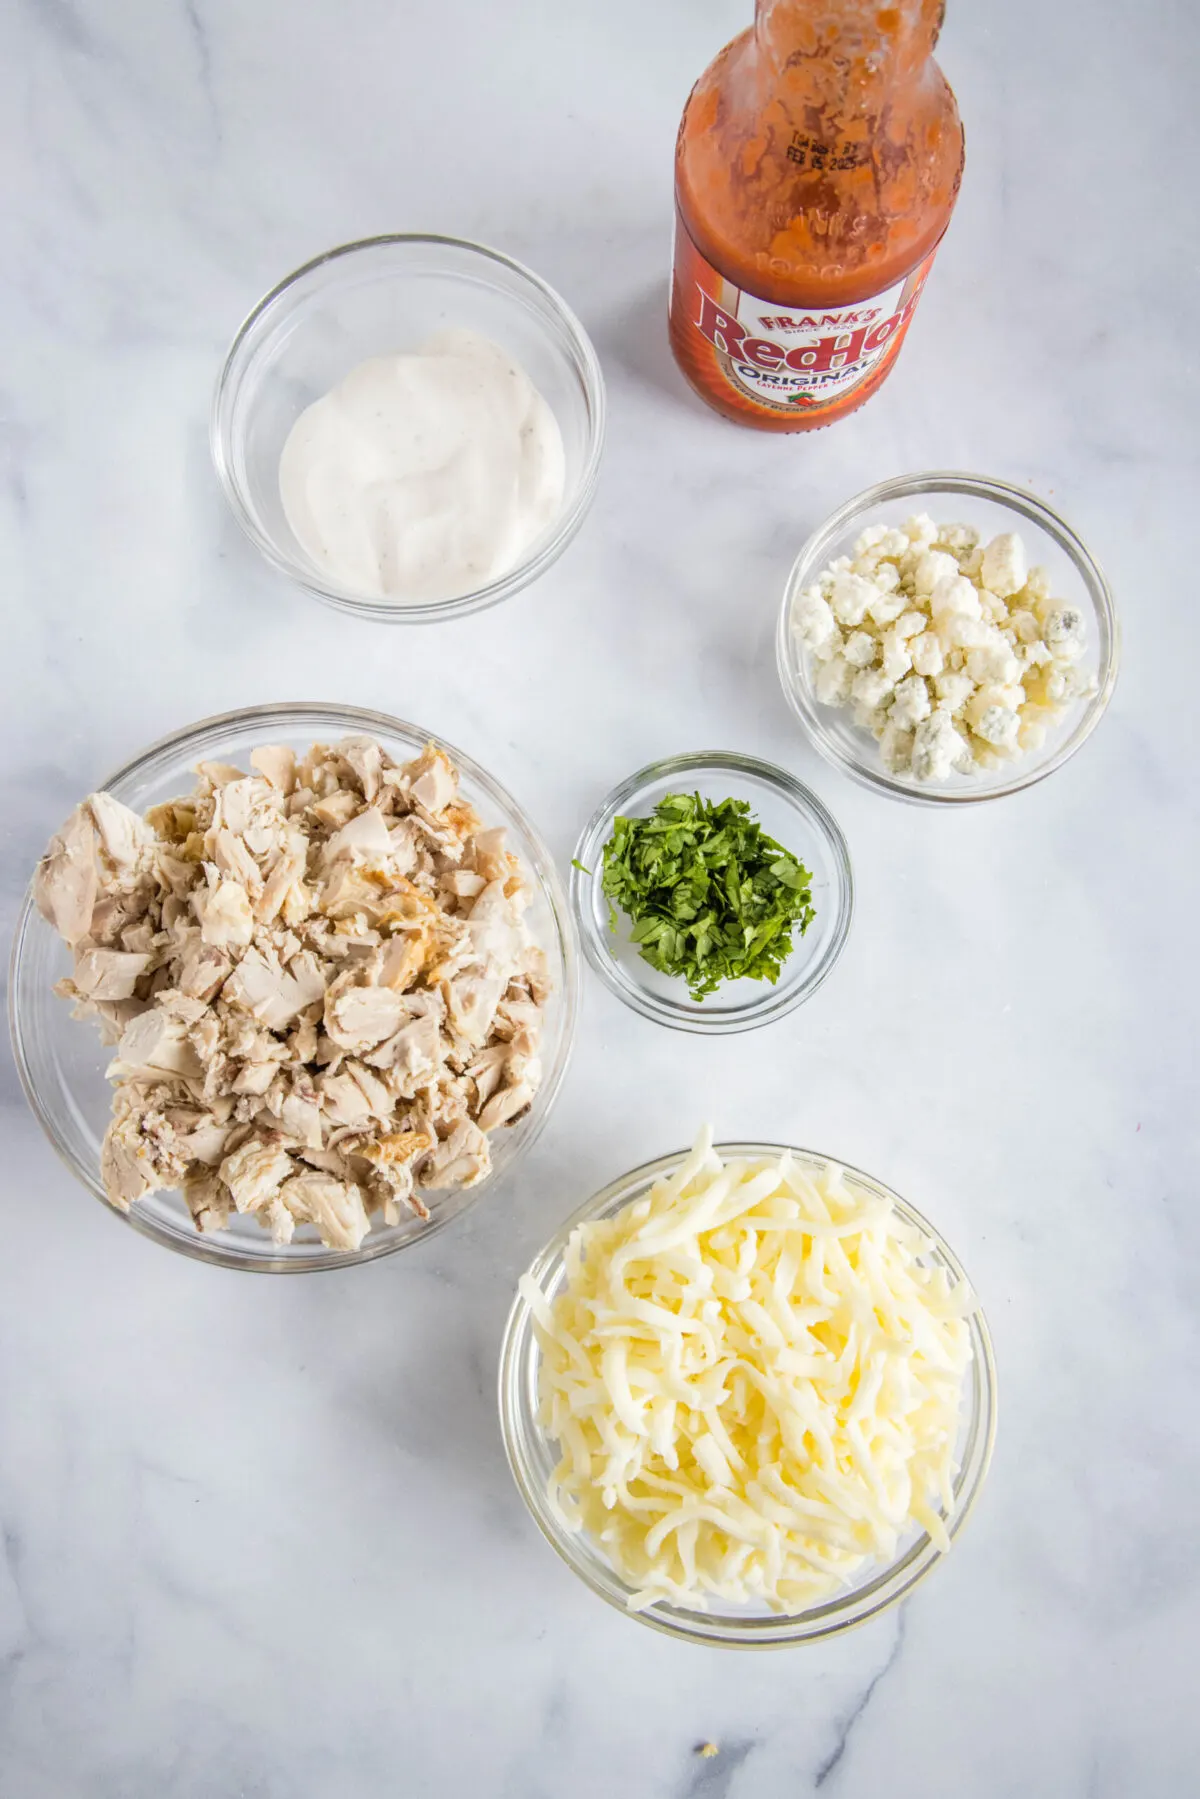 Overhead view of the ingredients needed for buffalo chicken pizza: a bowl of shredded chicken, a bowl of shredded cheese, a bowl of ranch dressing, a bowl of blue cheese, a bowl of parsley, and a bottle of wing sauce